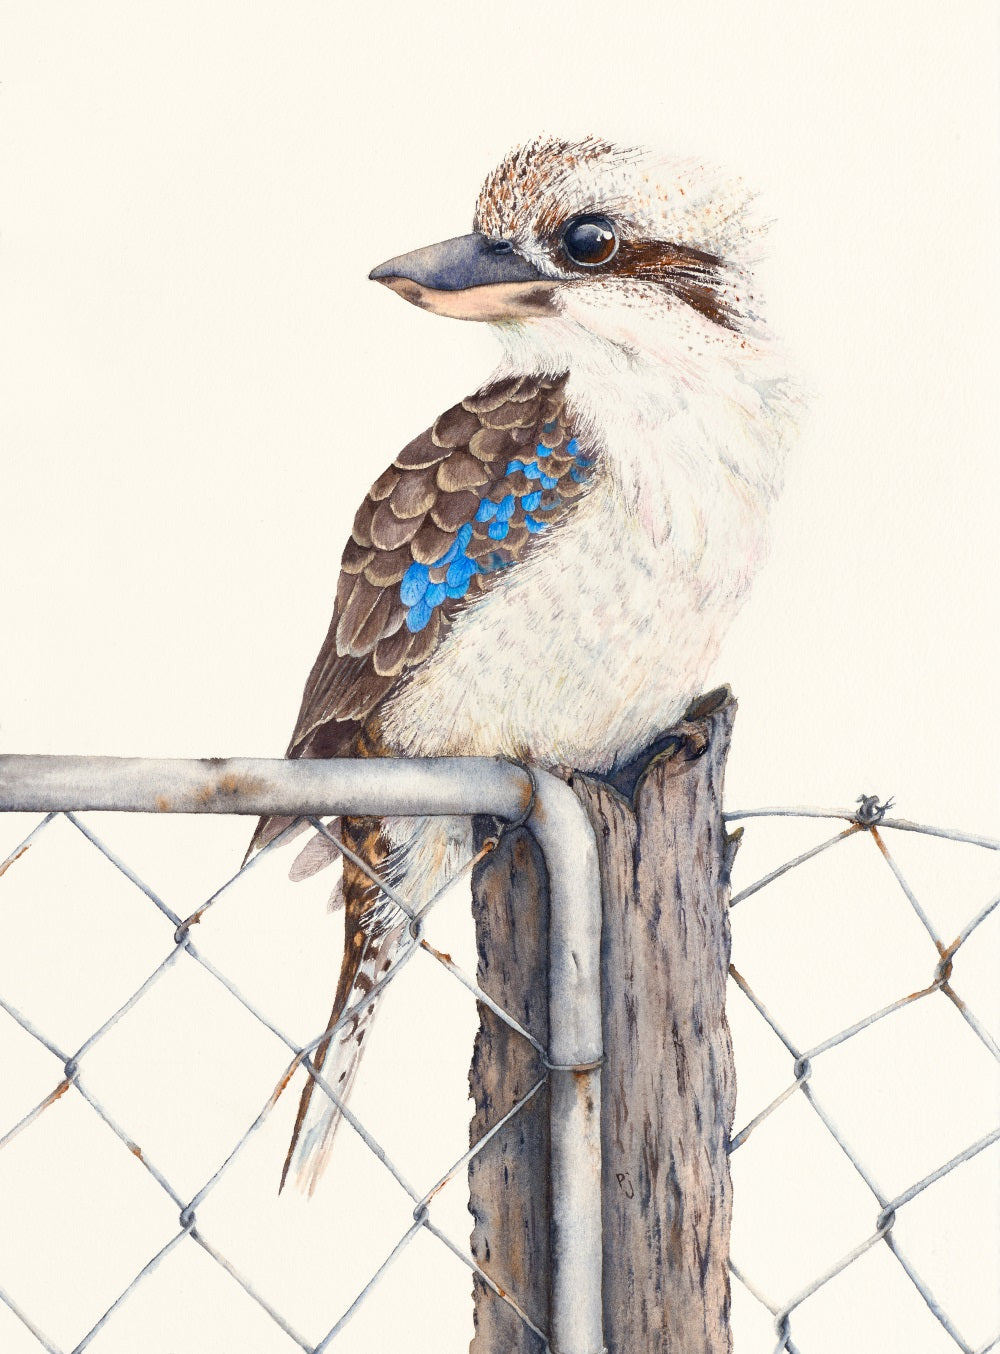 Sitting on the Fence - A print of a watercolour painting of a Kookaburra